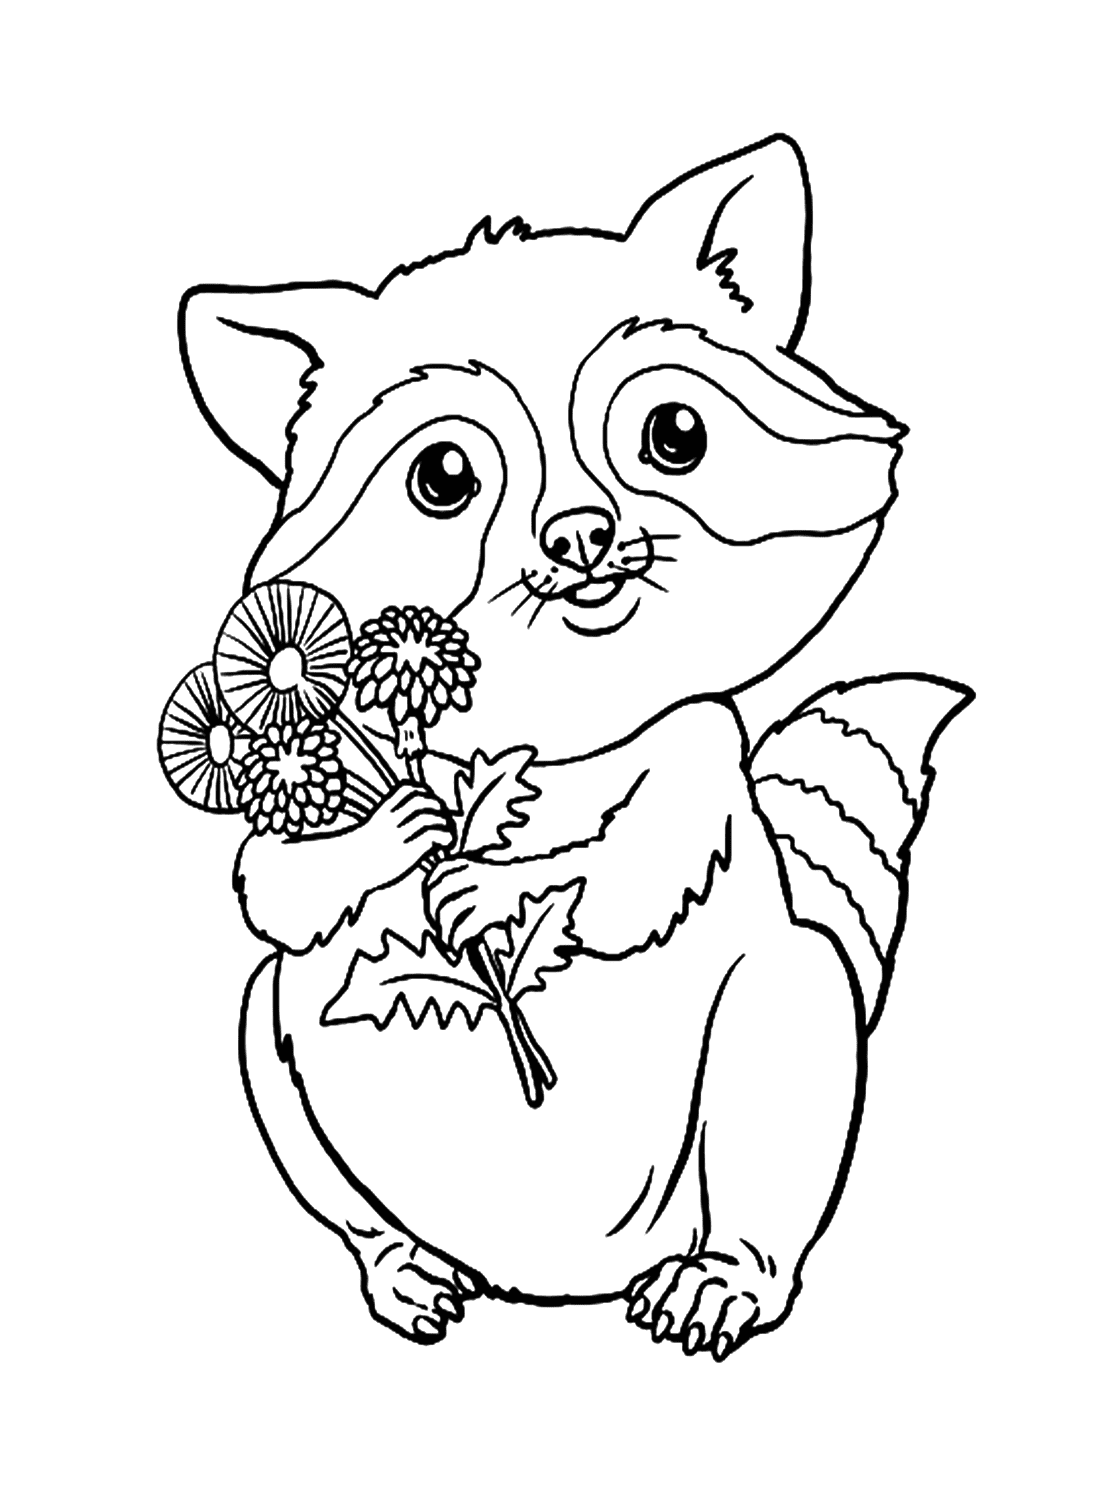 Cute Raccoon With Flowers from Raccoon